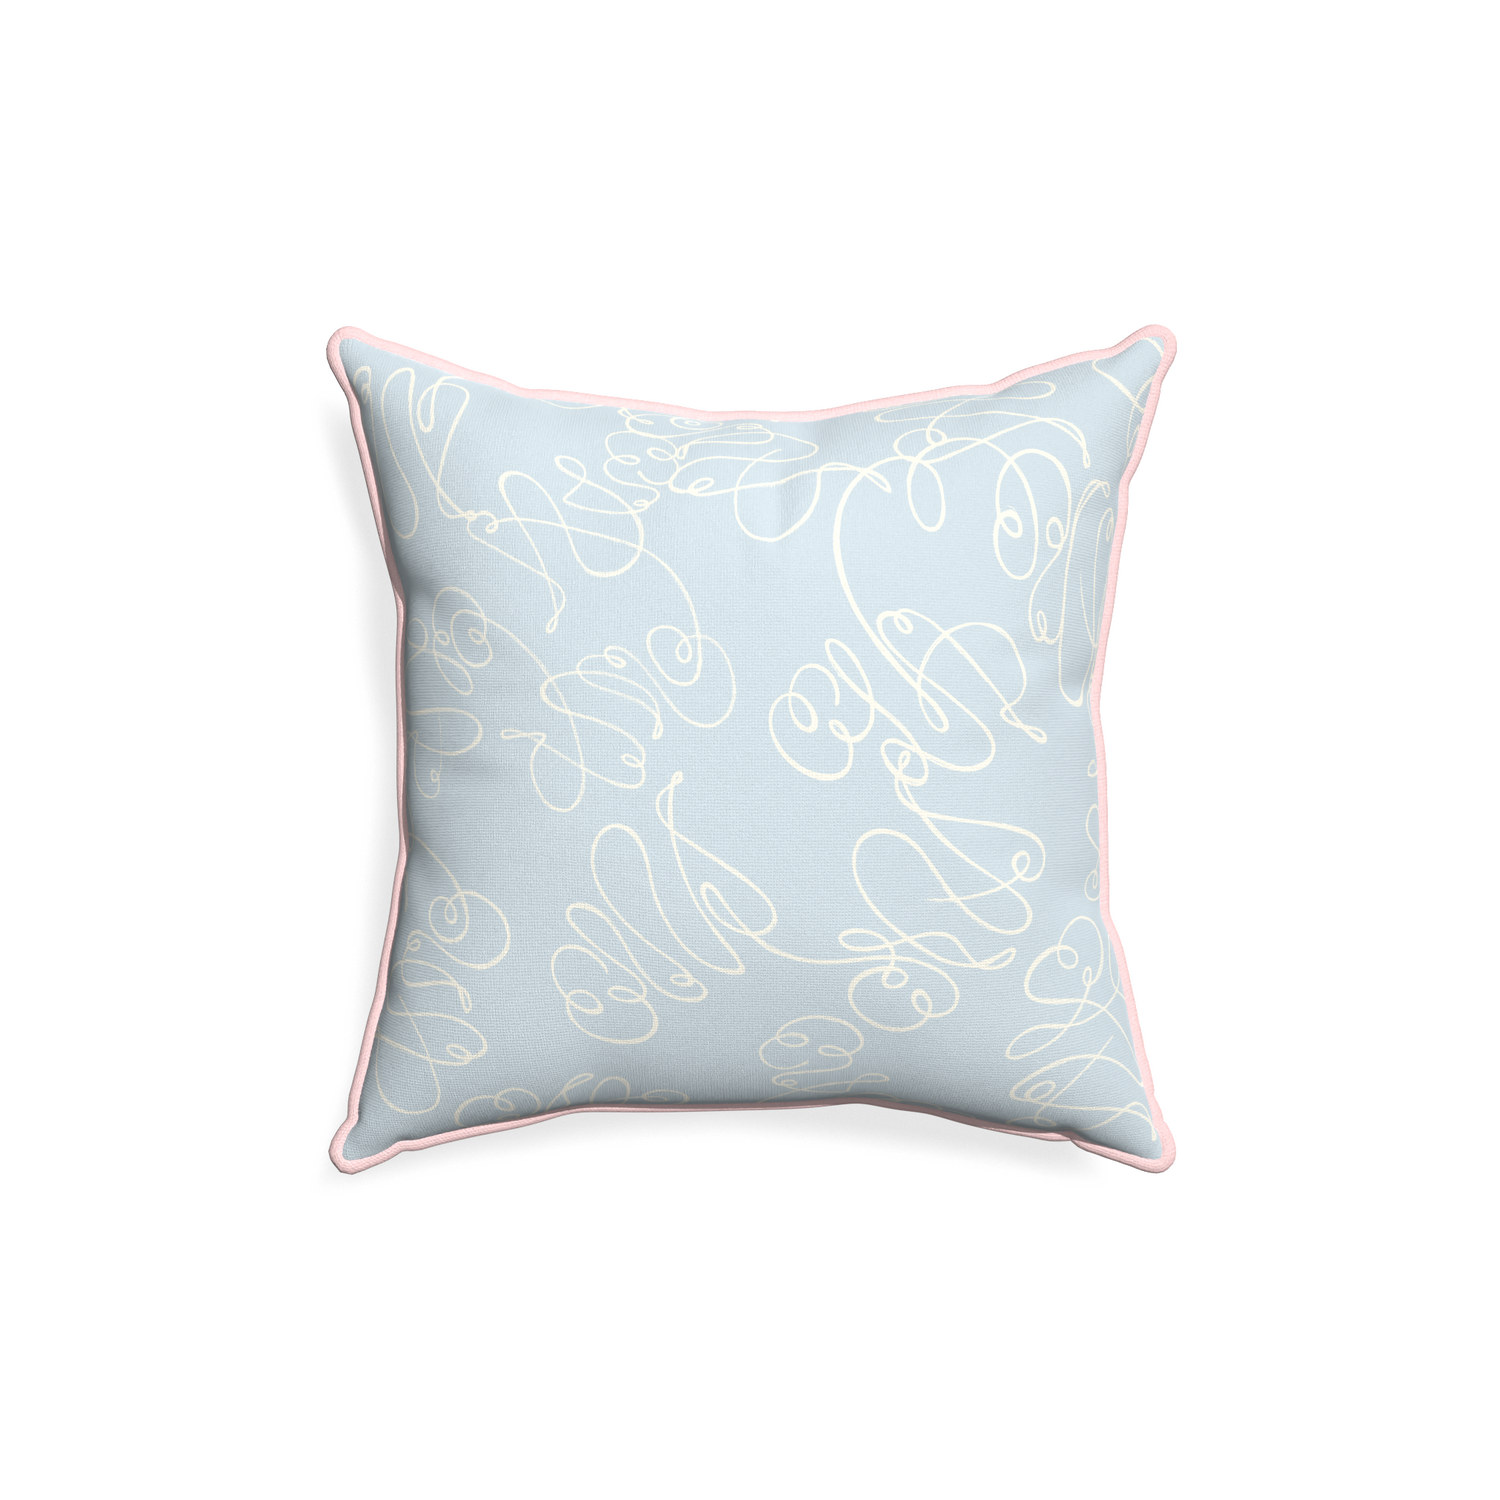 18-square mirabella custom pillow with petal piping on white background